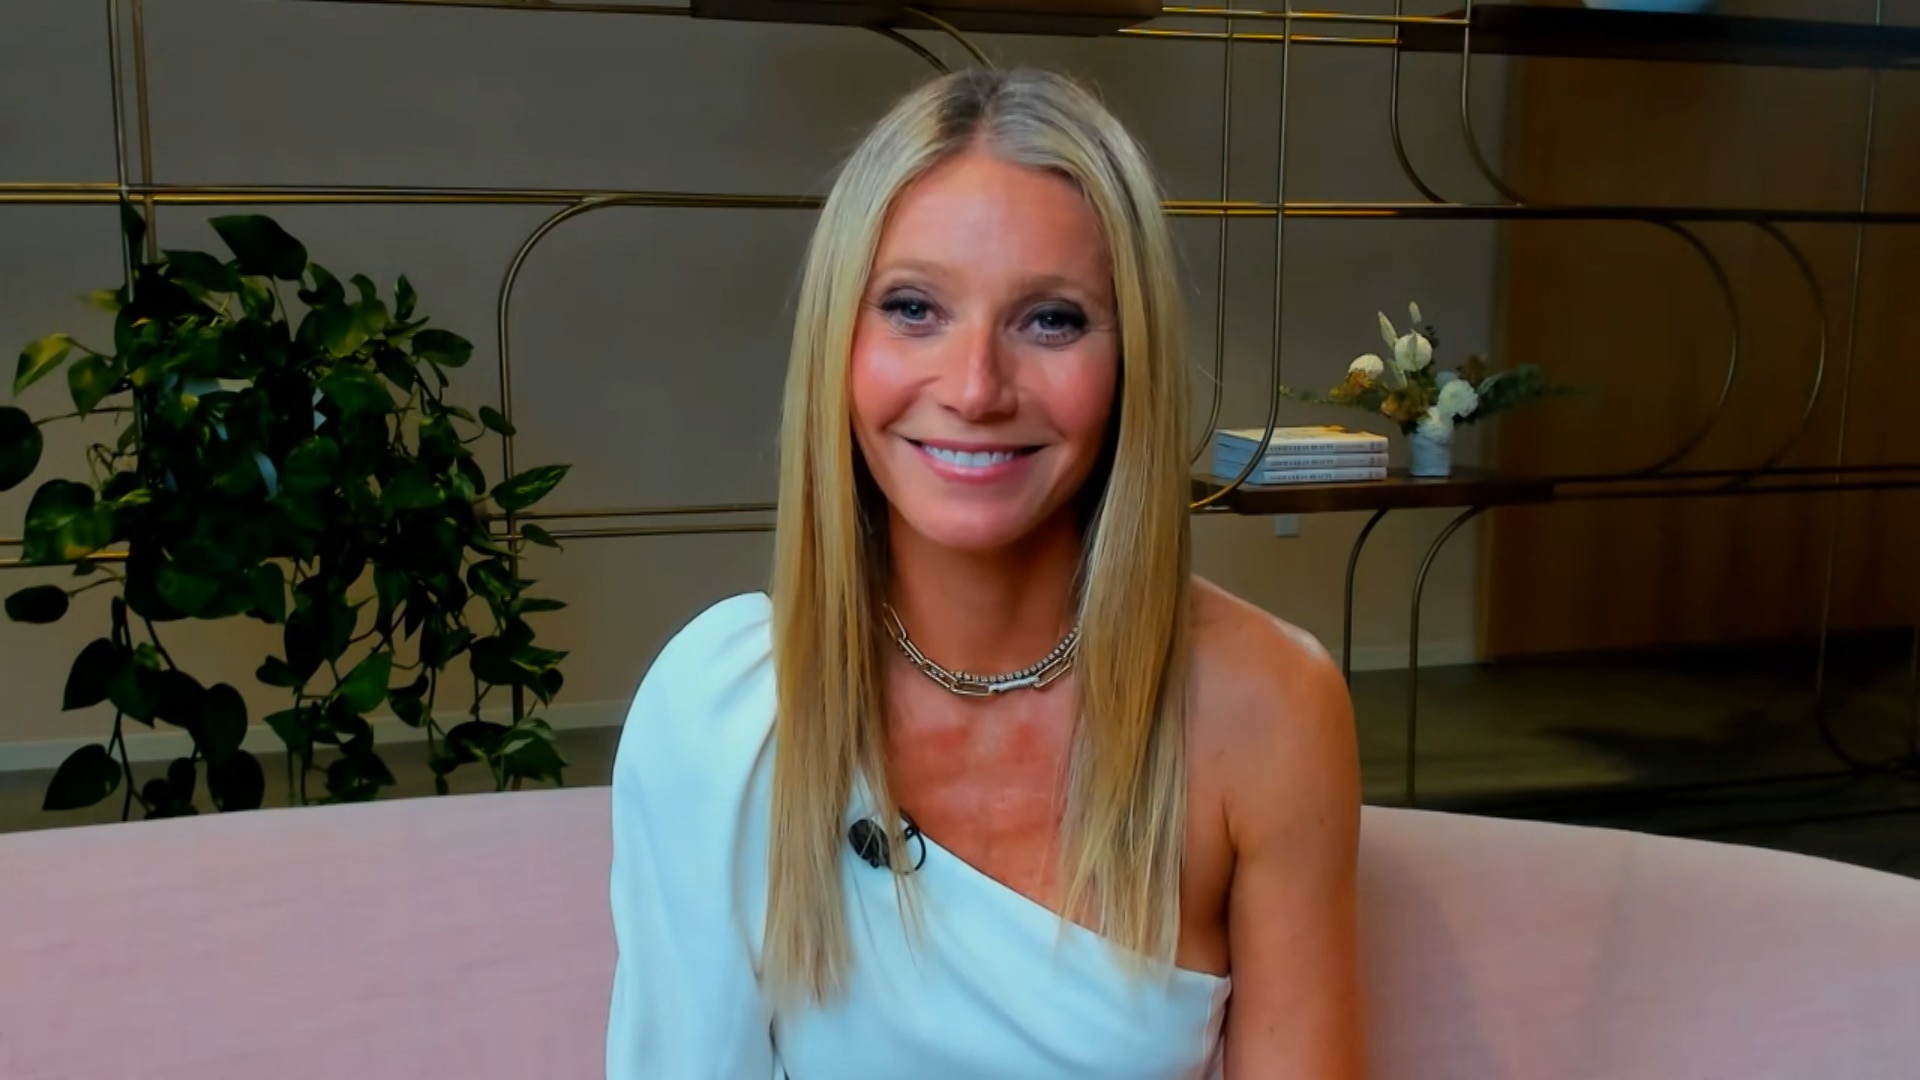 Watch Watch What Happens Live Highlight: Gwyneth Paltrow on Gifting Sex ...